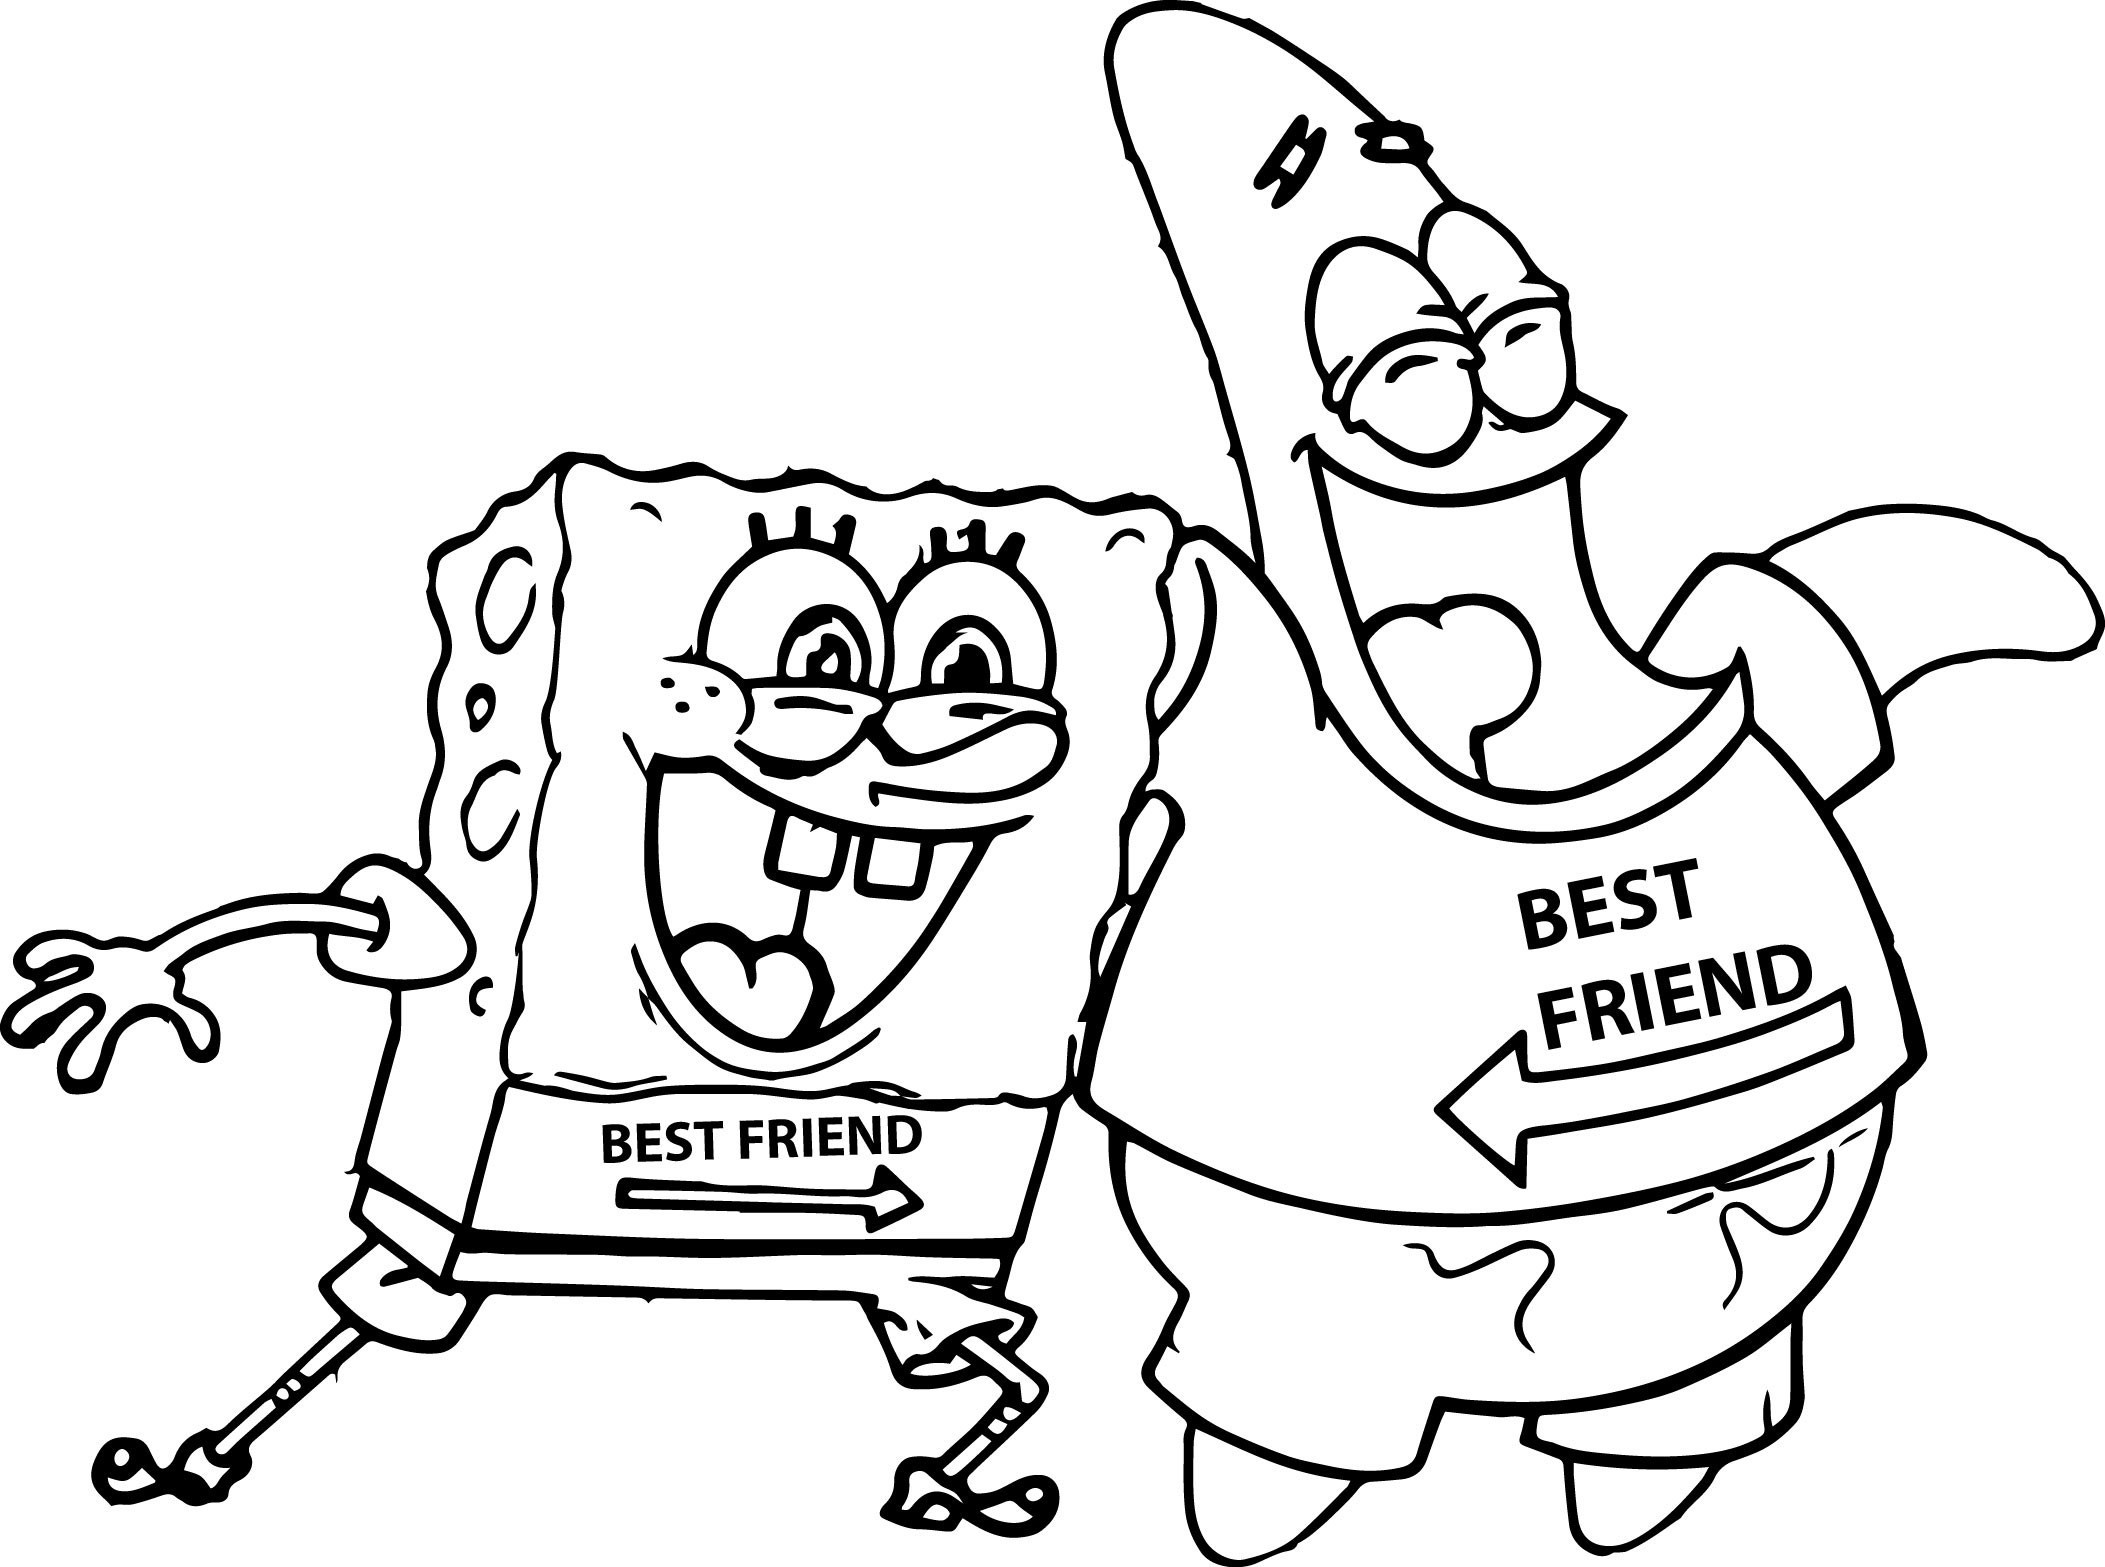 free coloring pages Easy Sponge Bob Color Page Coloring Pages Spongebob 8147 7802 of